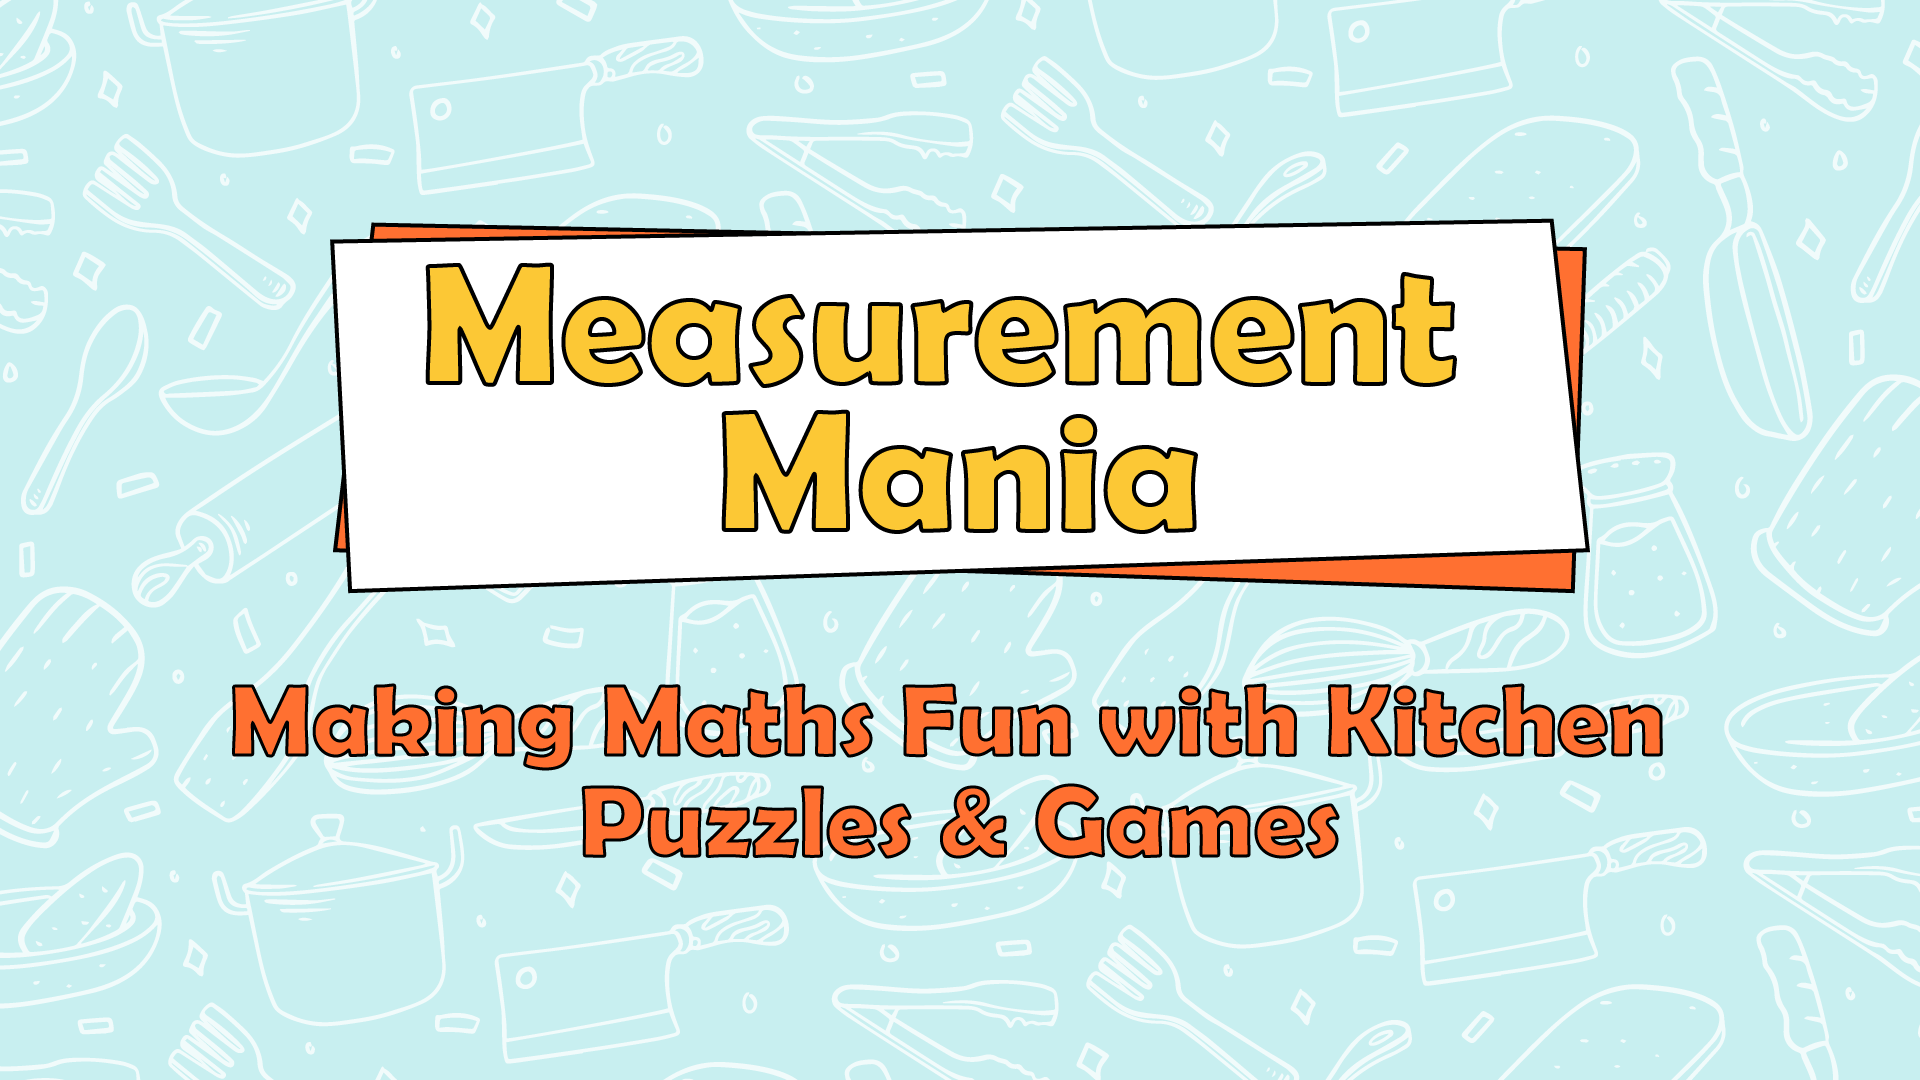 Measurement Mania: Making Maths Fun with Kitchen Puzzles & Games